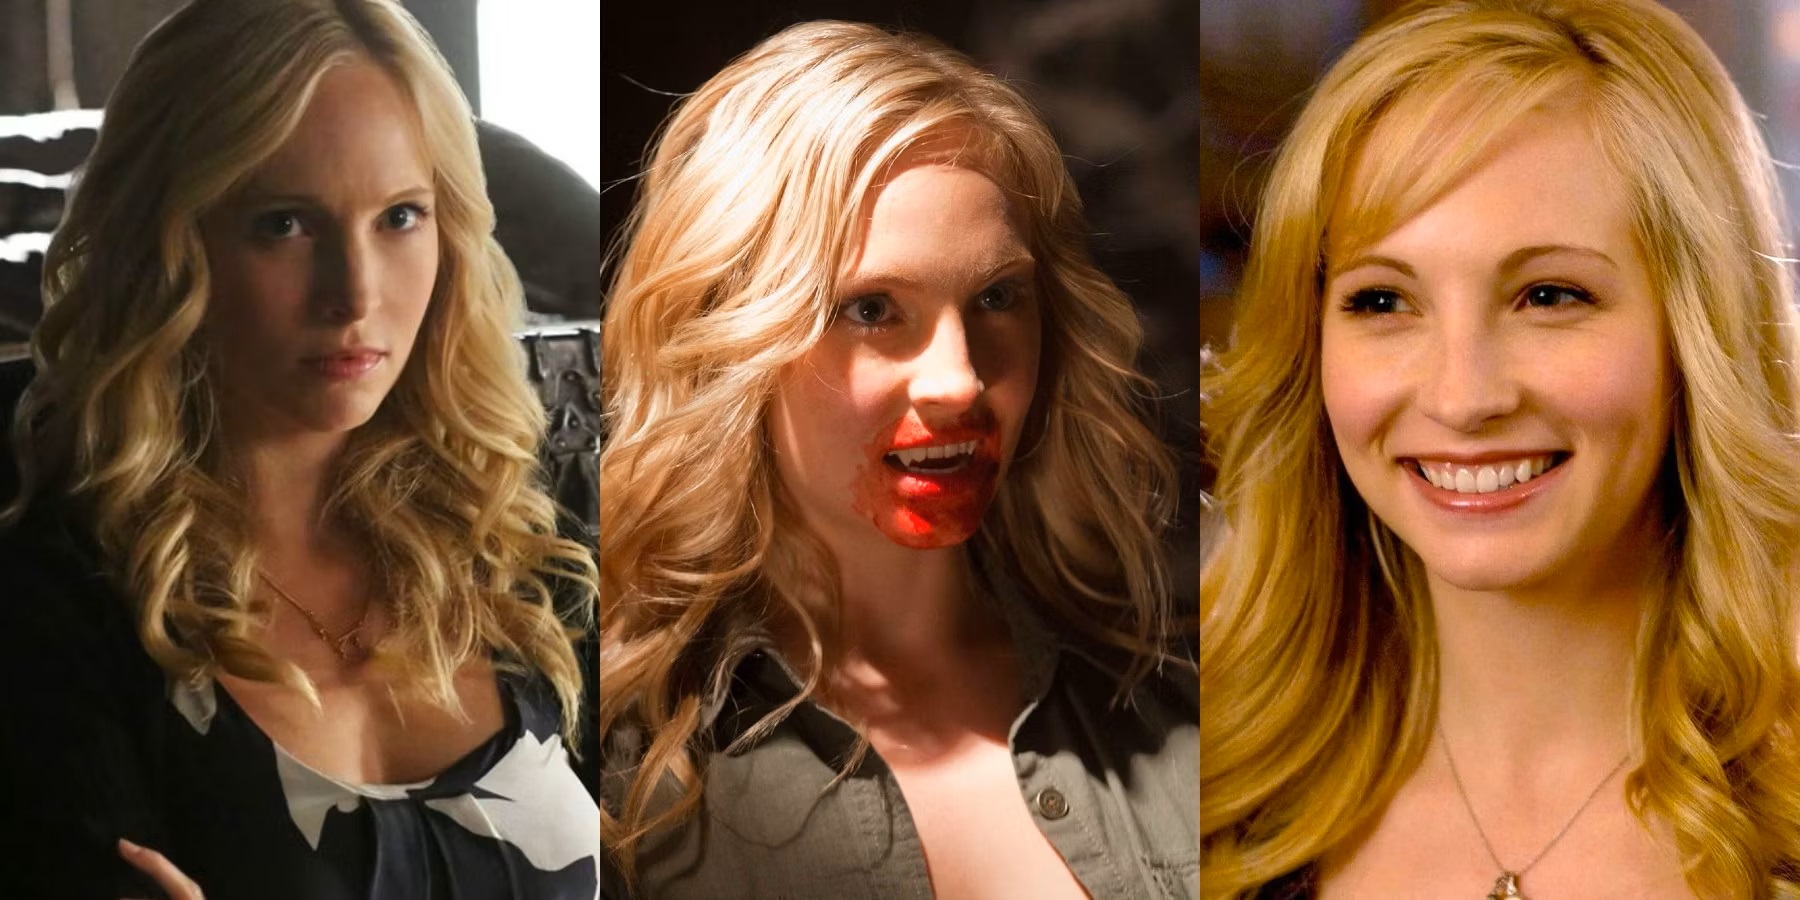 The Vampire Diaries Caroline Forbes: Fun Facts About the Character